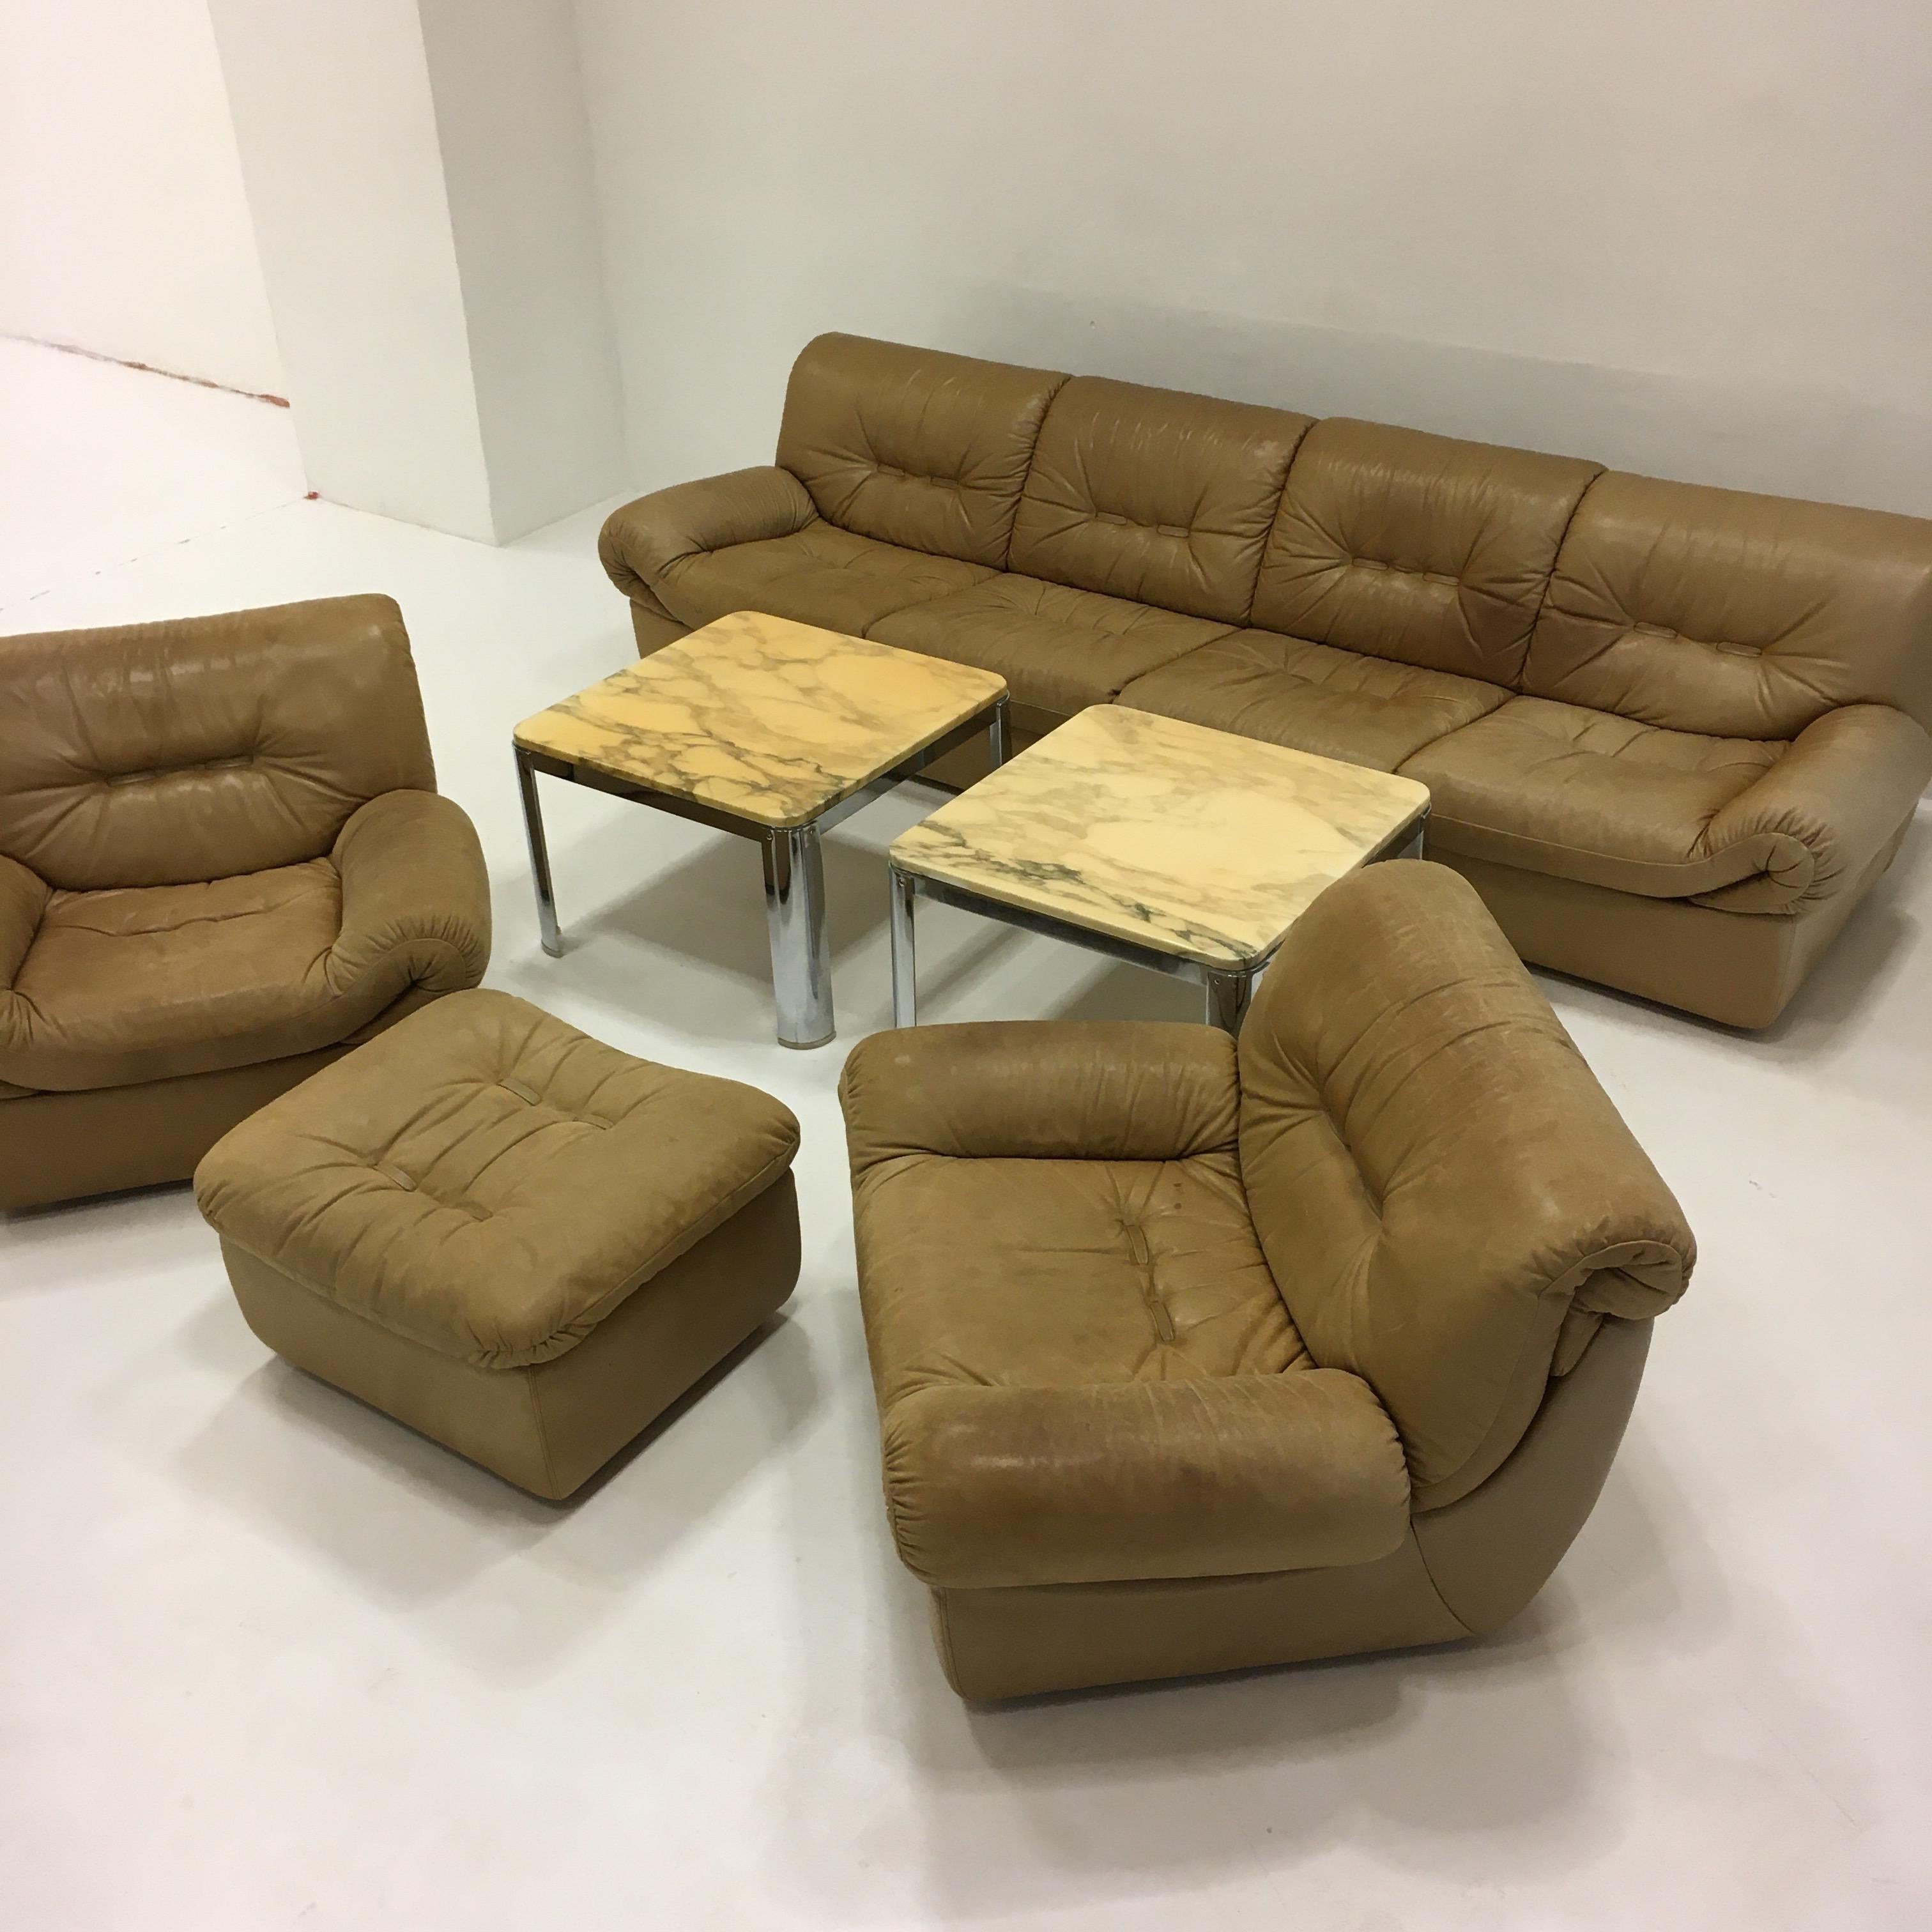 Wittmann, Model 'Chairman' Sofa Suite Living Room Set, Patinated Leather, 1971 For Sale 10